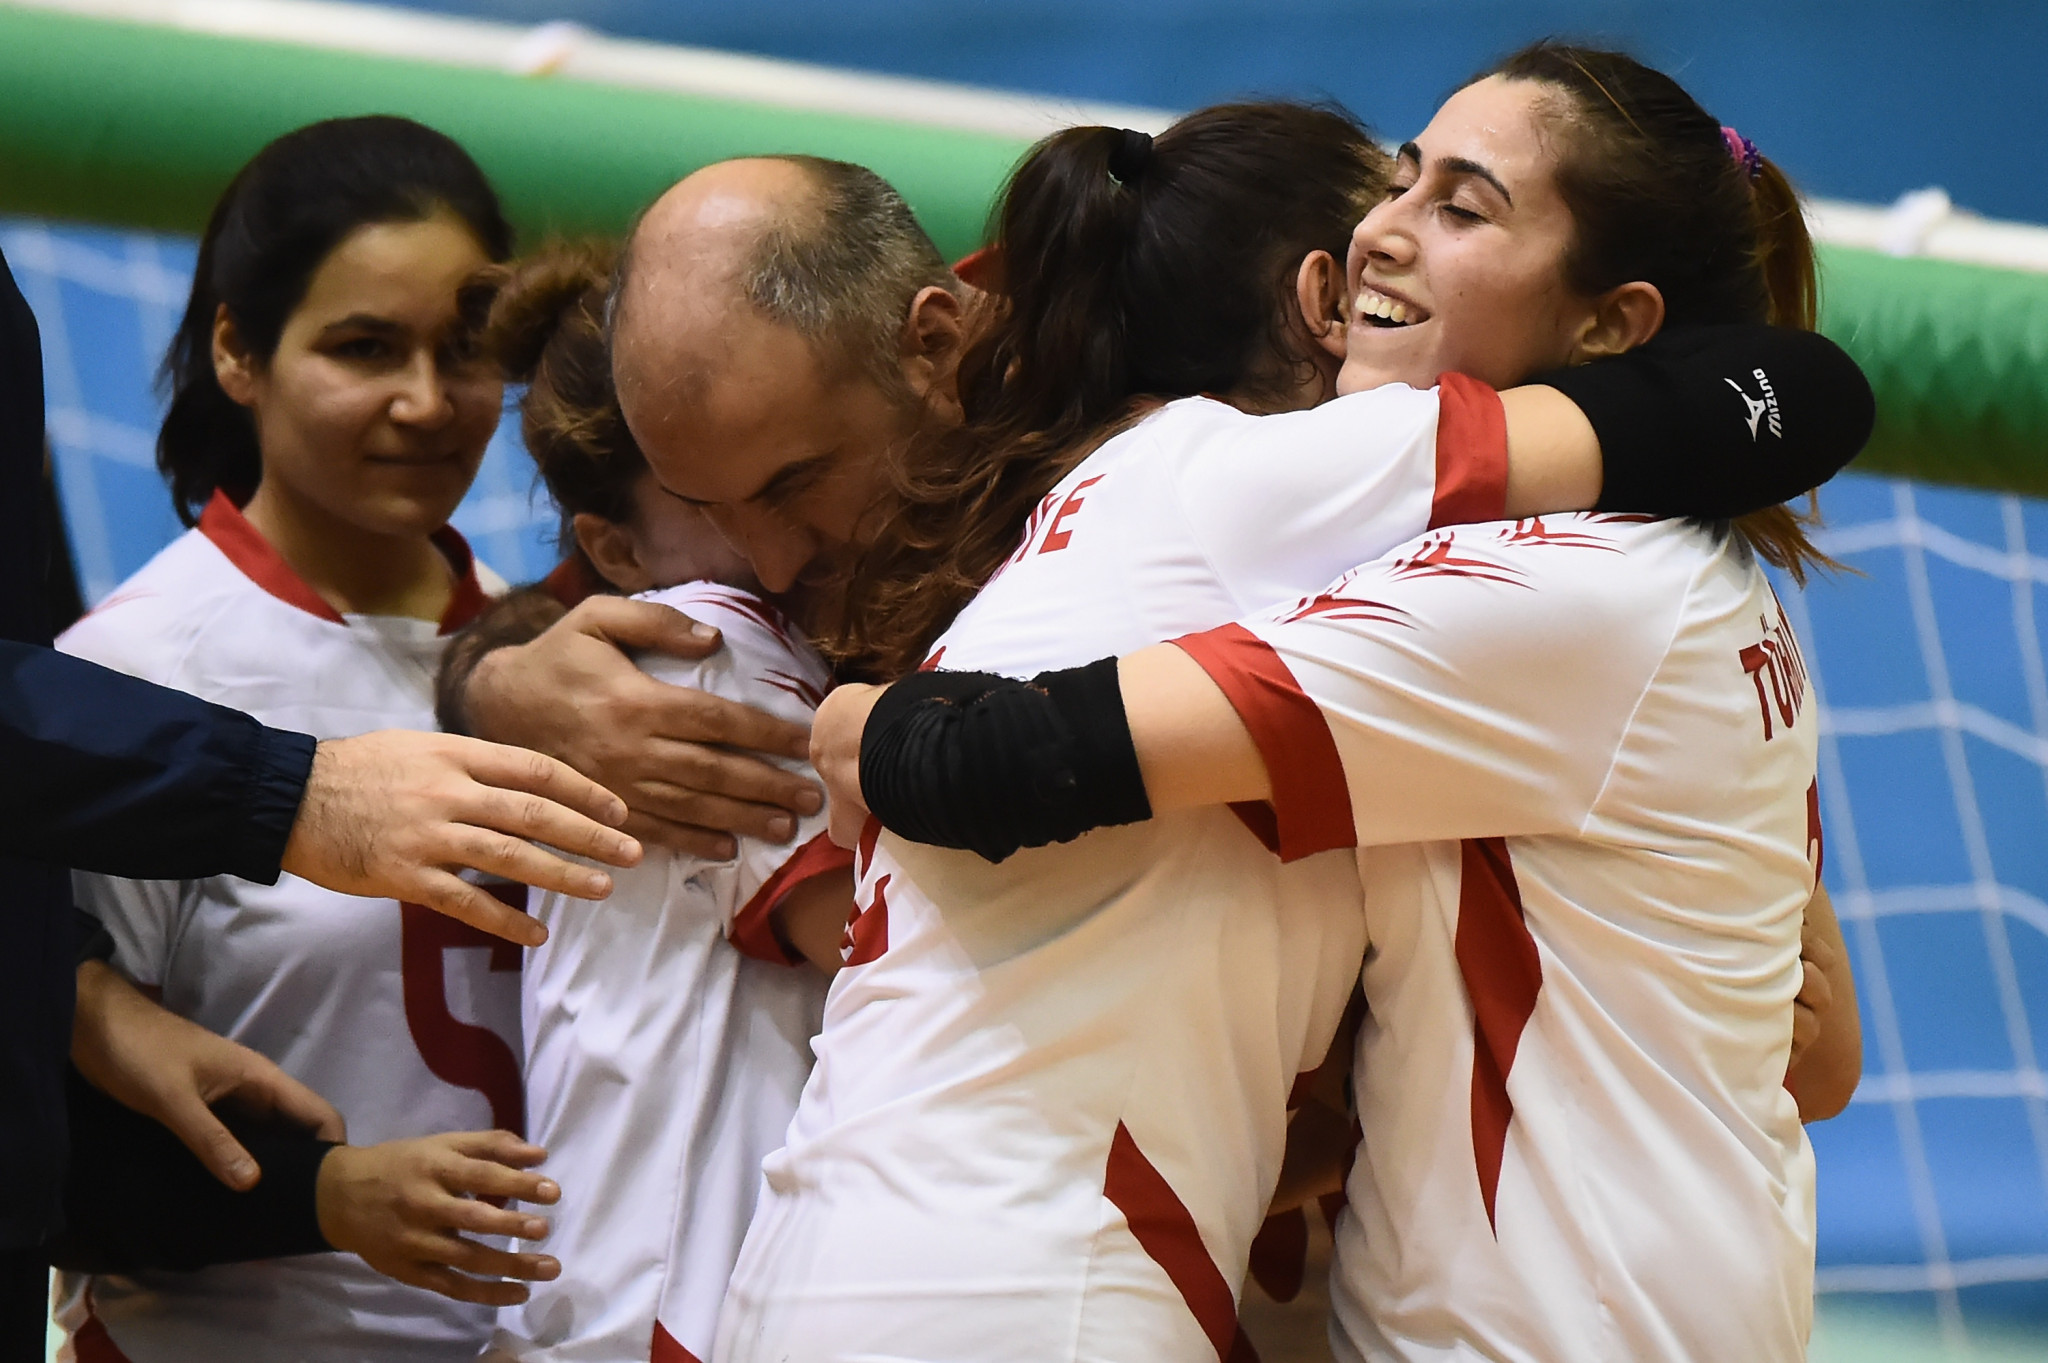 Turkey will hope to defend their women's title at Tokyo 2020 ©Getty Images